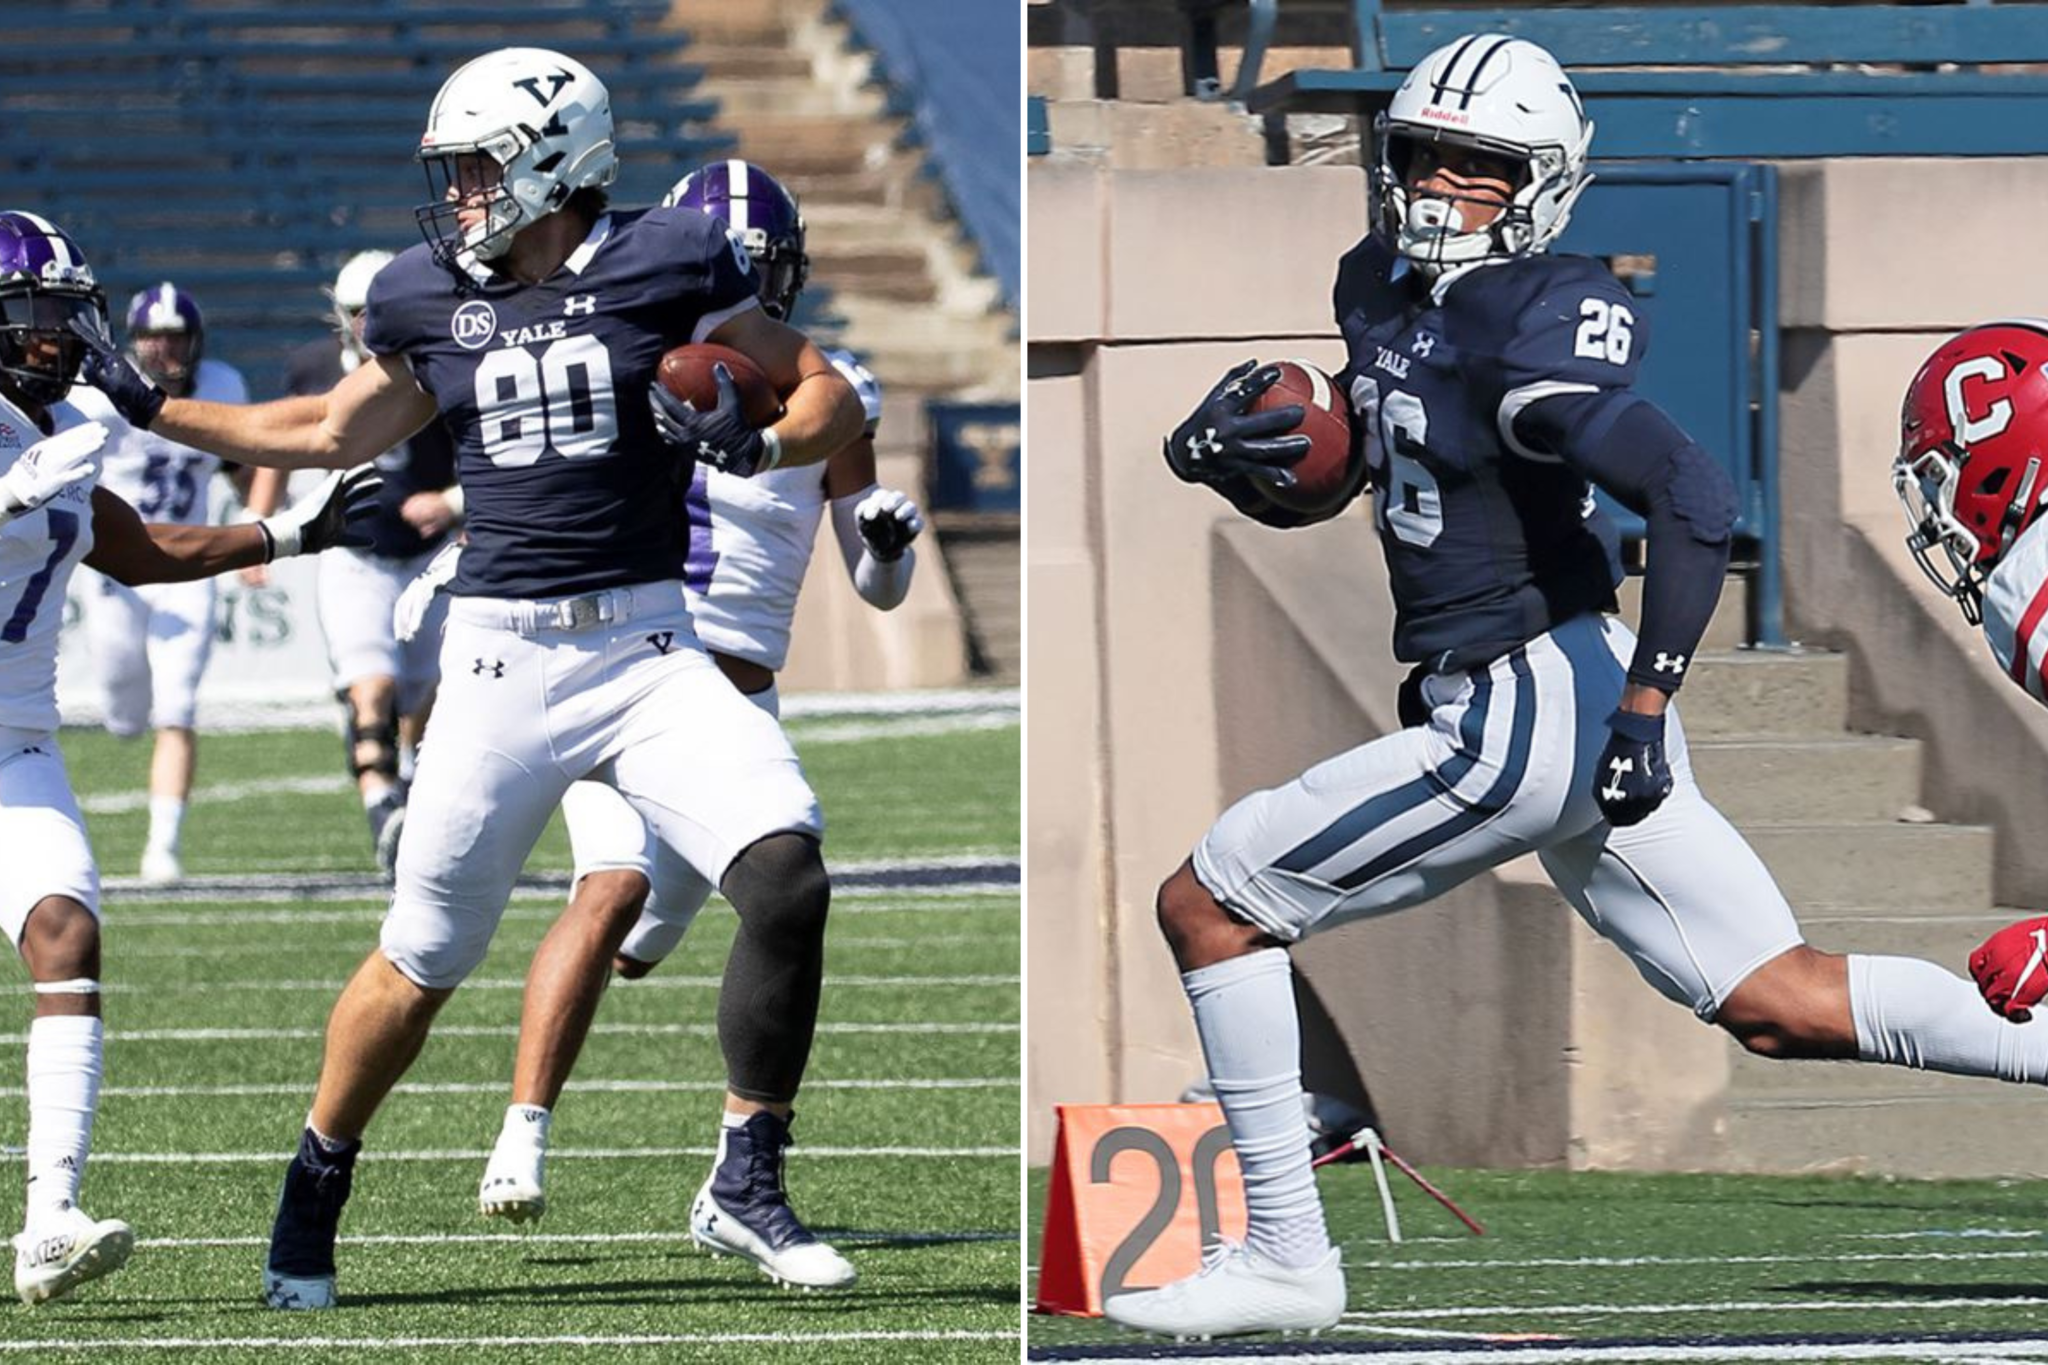 FOOTBALL: Five former Bulldogs play at 2022 NFL camps - Yale Daily News